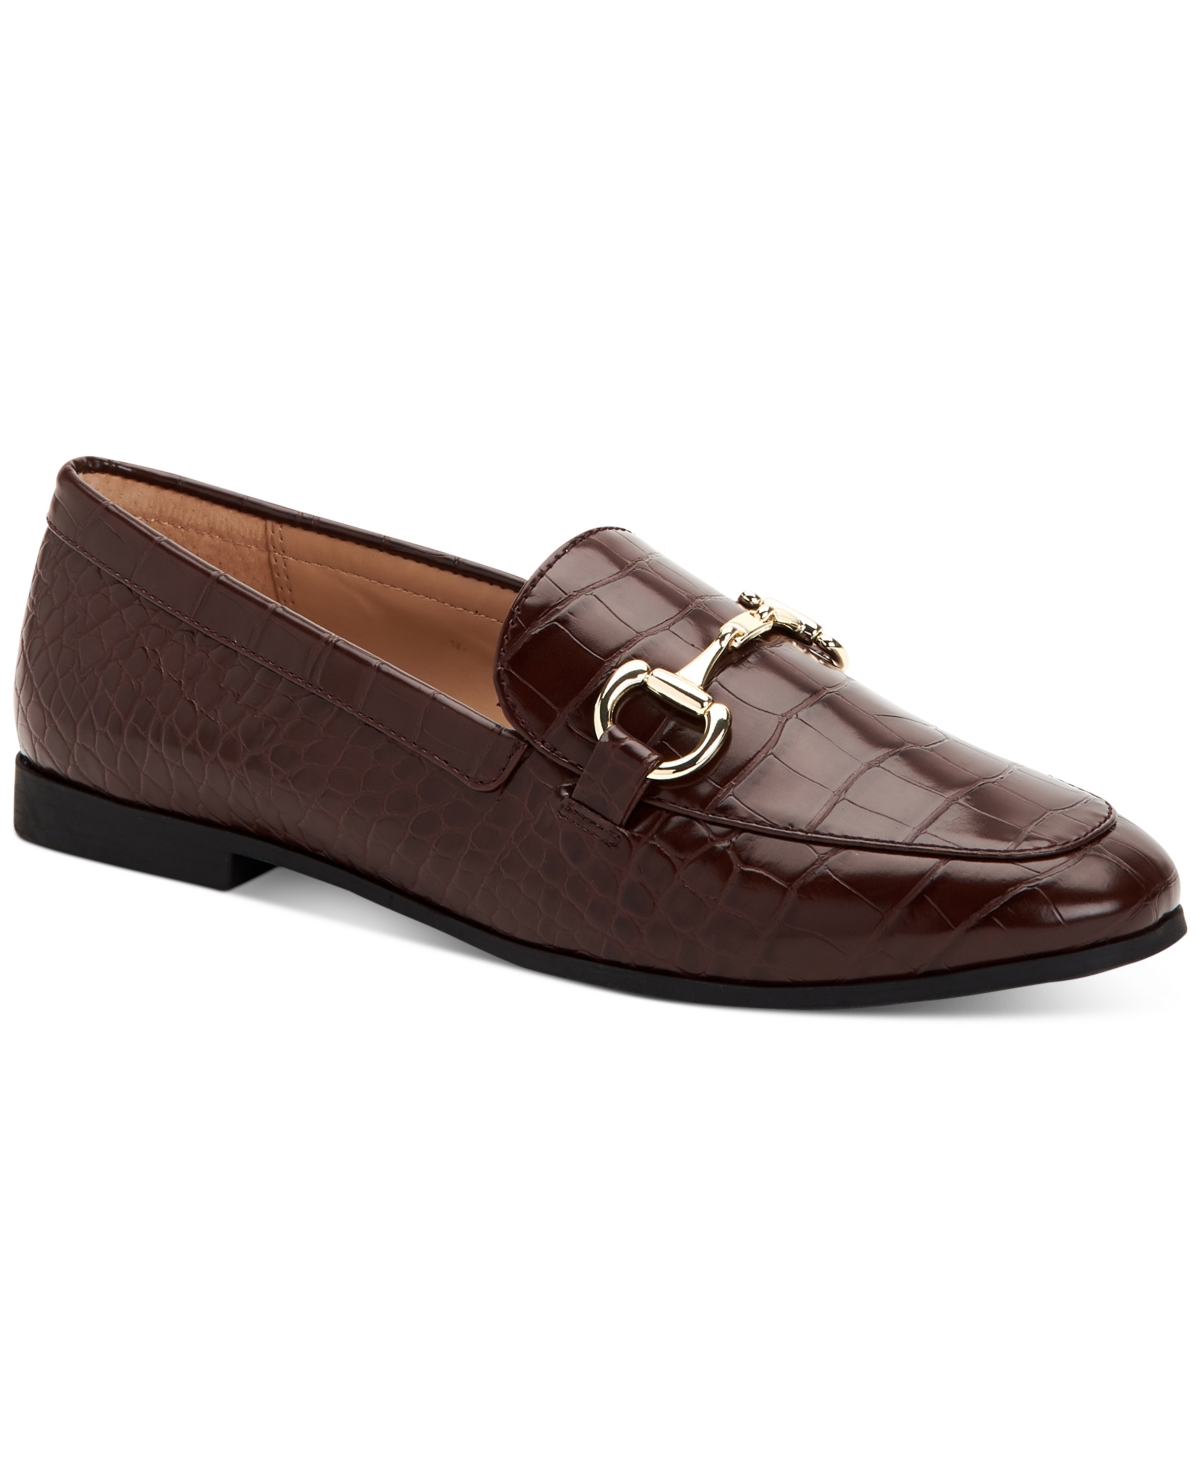 Women's Gayle Loafers, Created for Macy's - Chocolate Croco Print